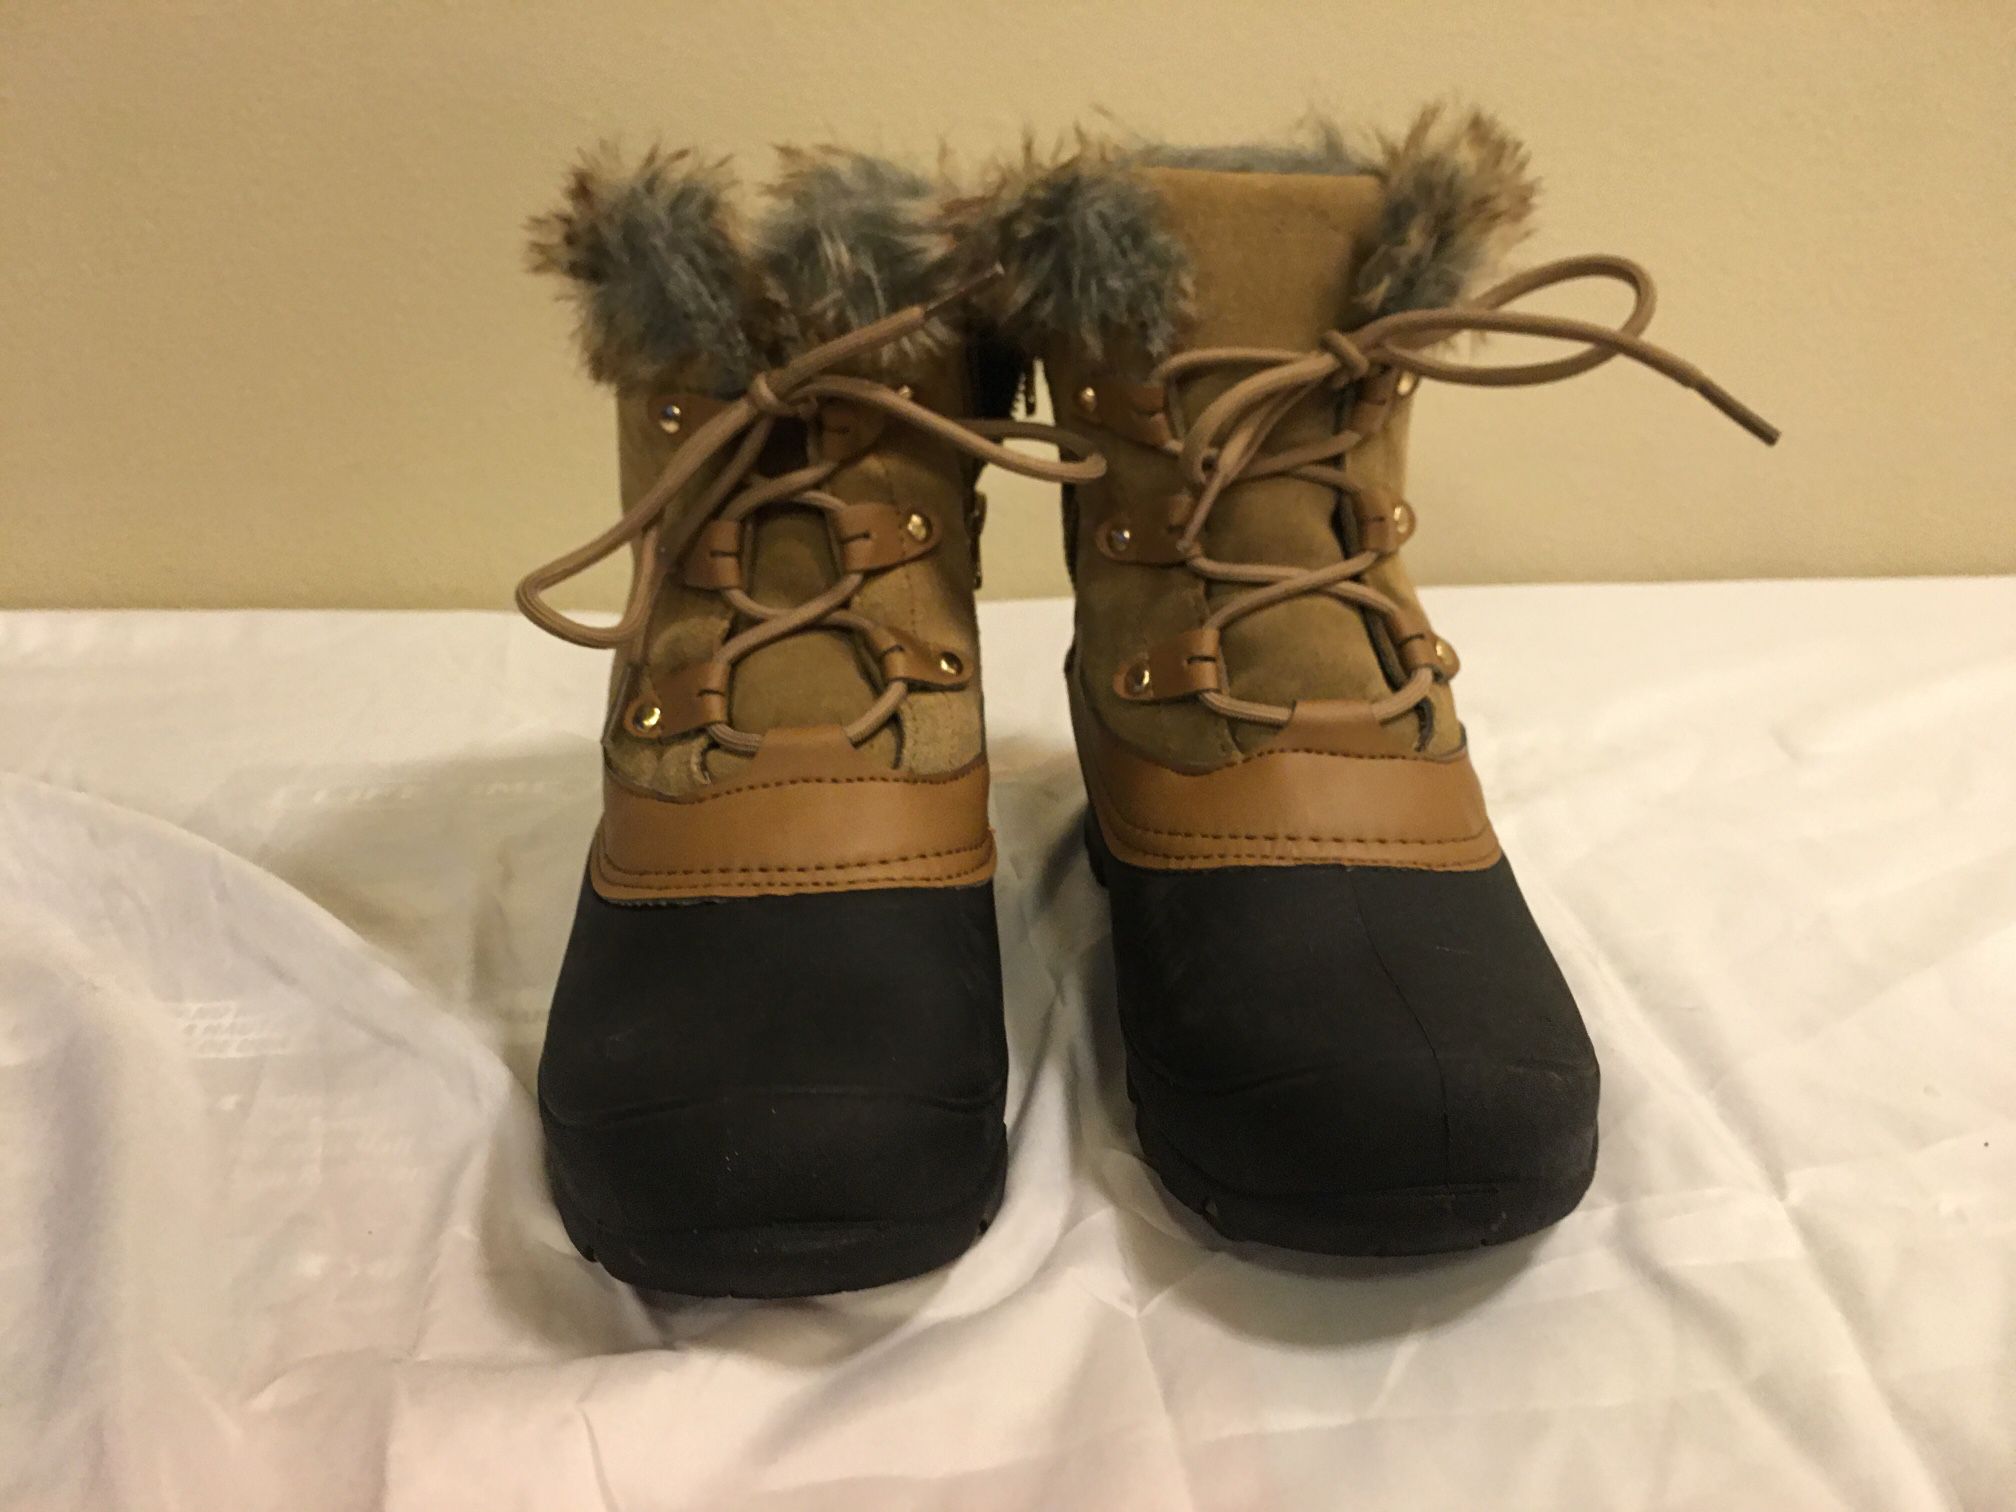 North side Fairfield Woman’s Waterproof Insulated Winter Snow Boots